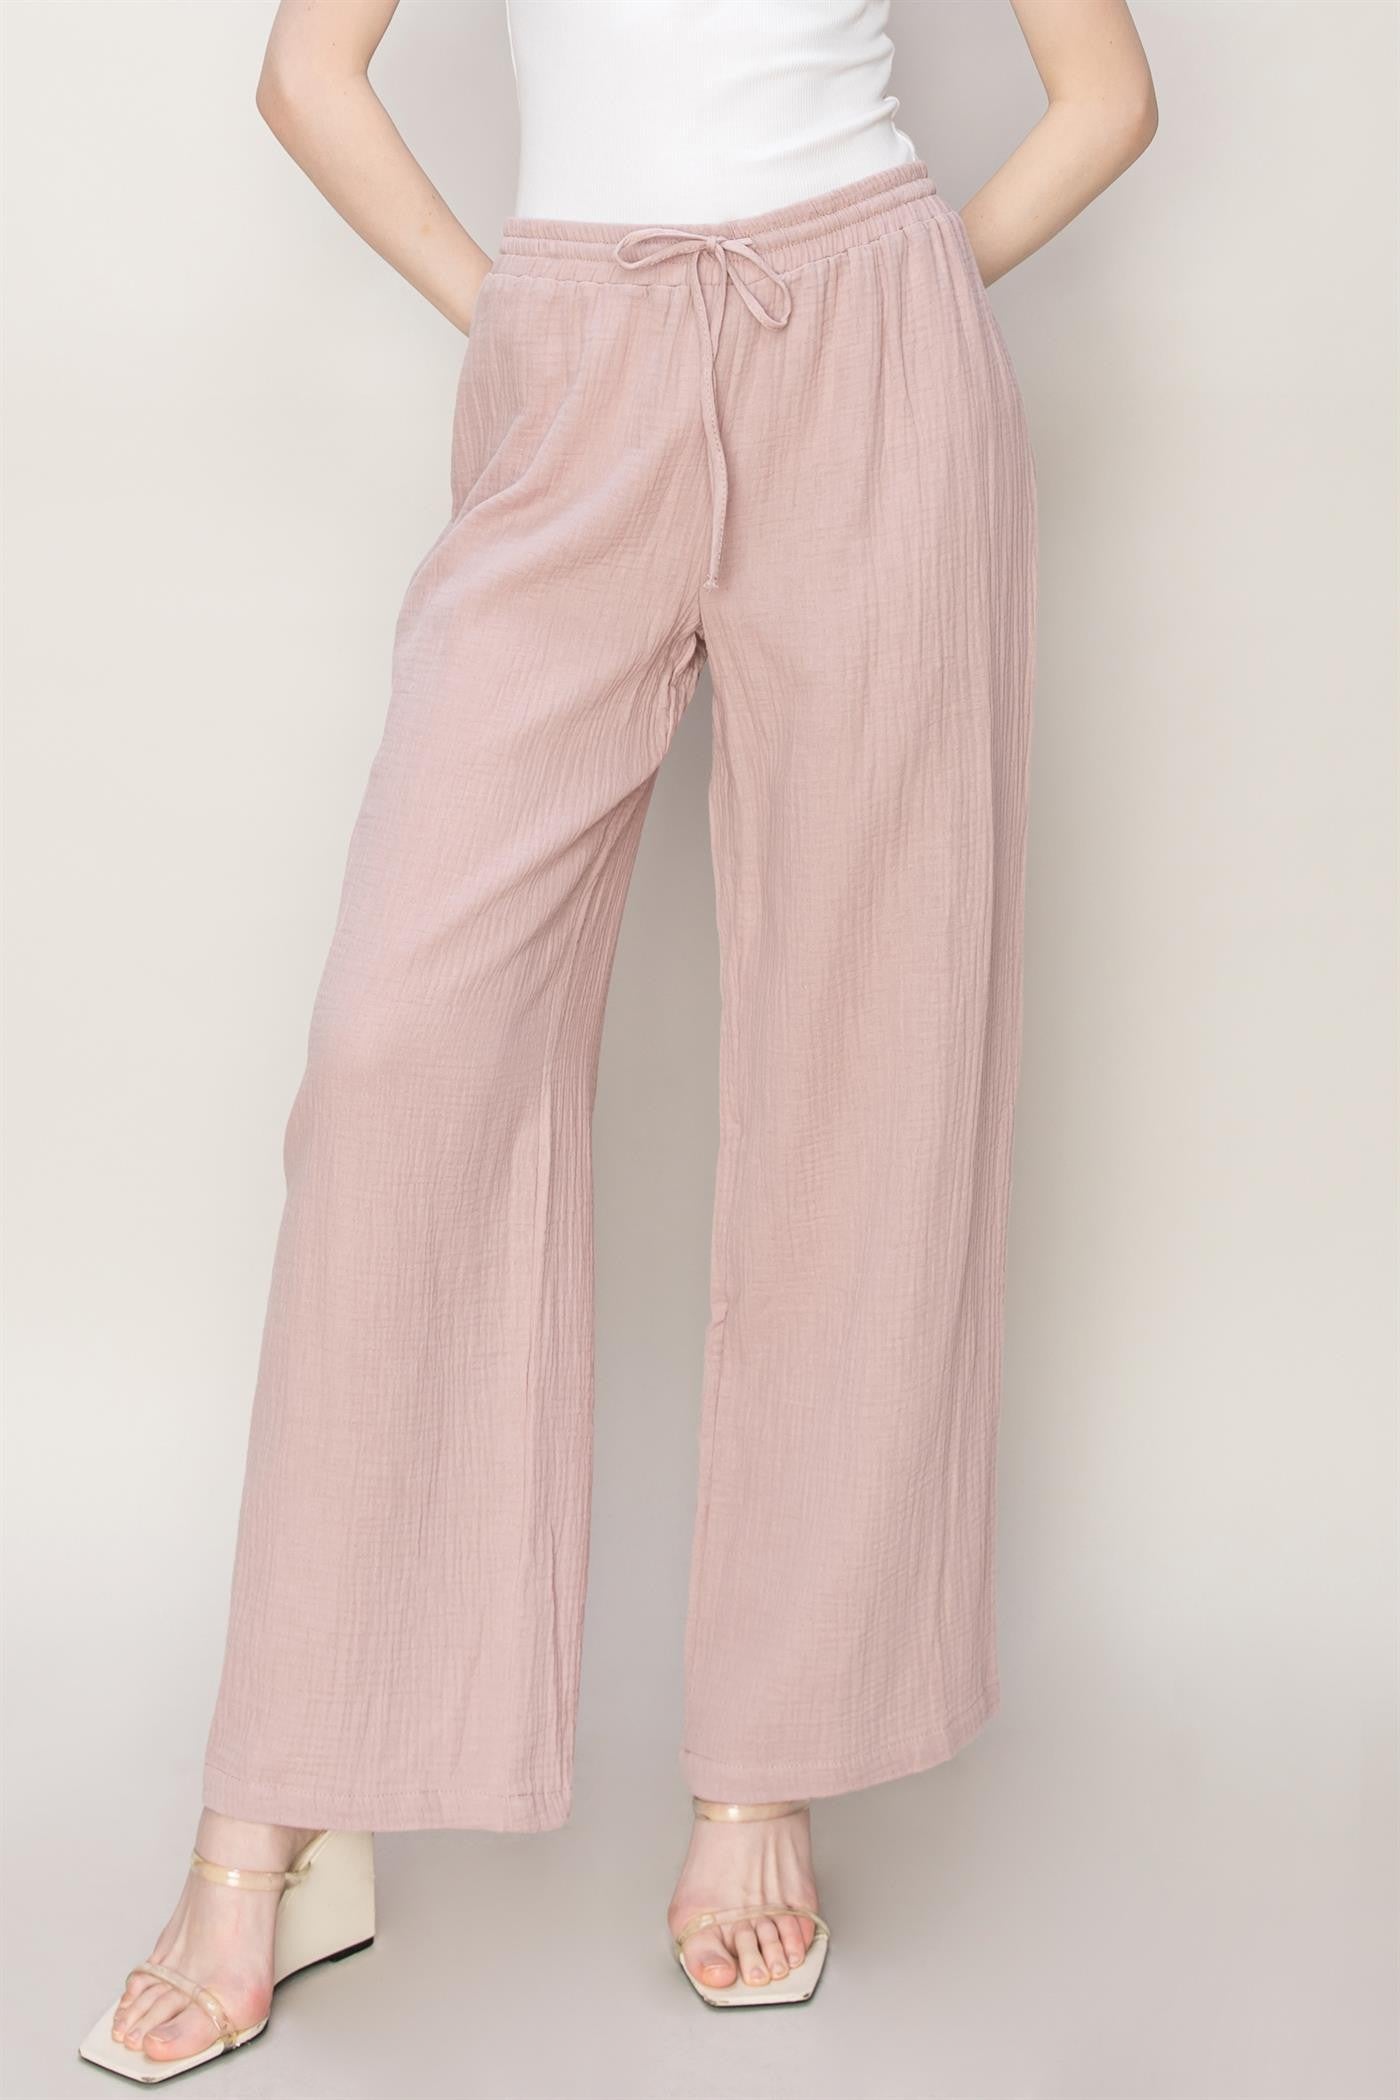 The Downtown Lounge Pants